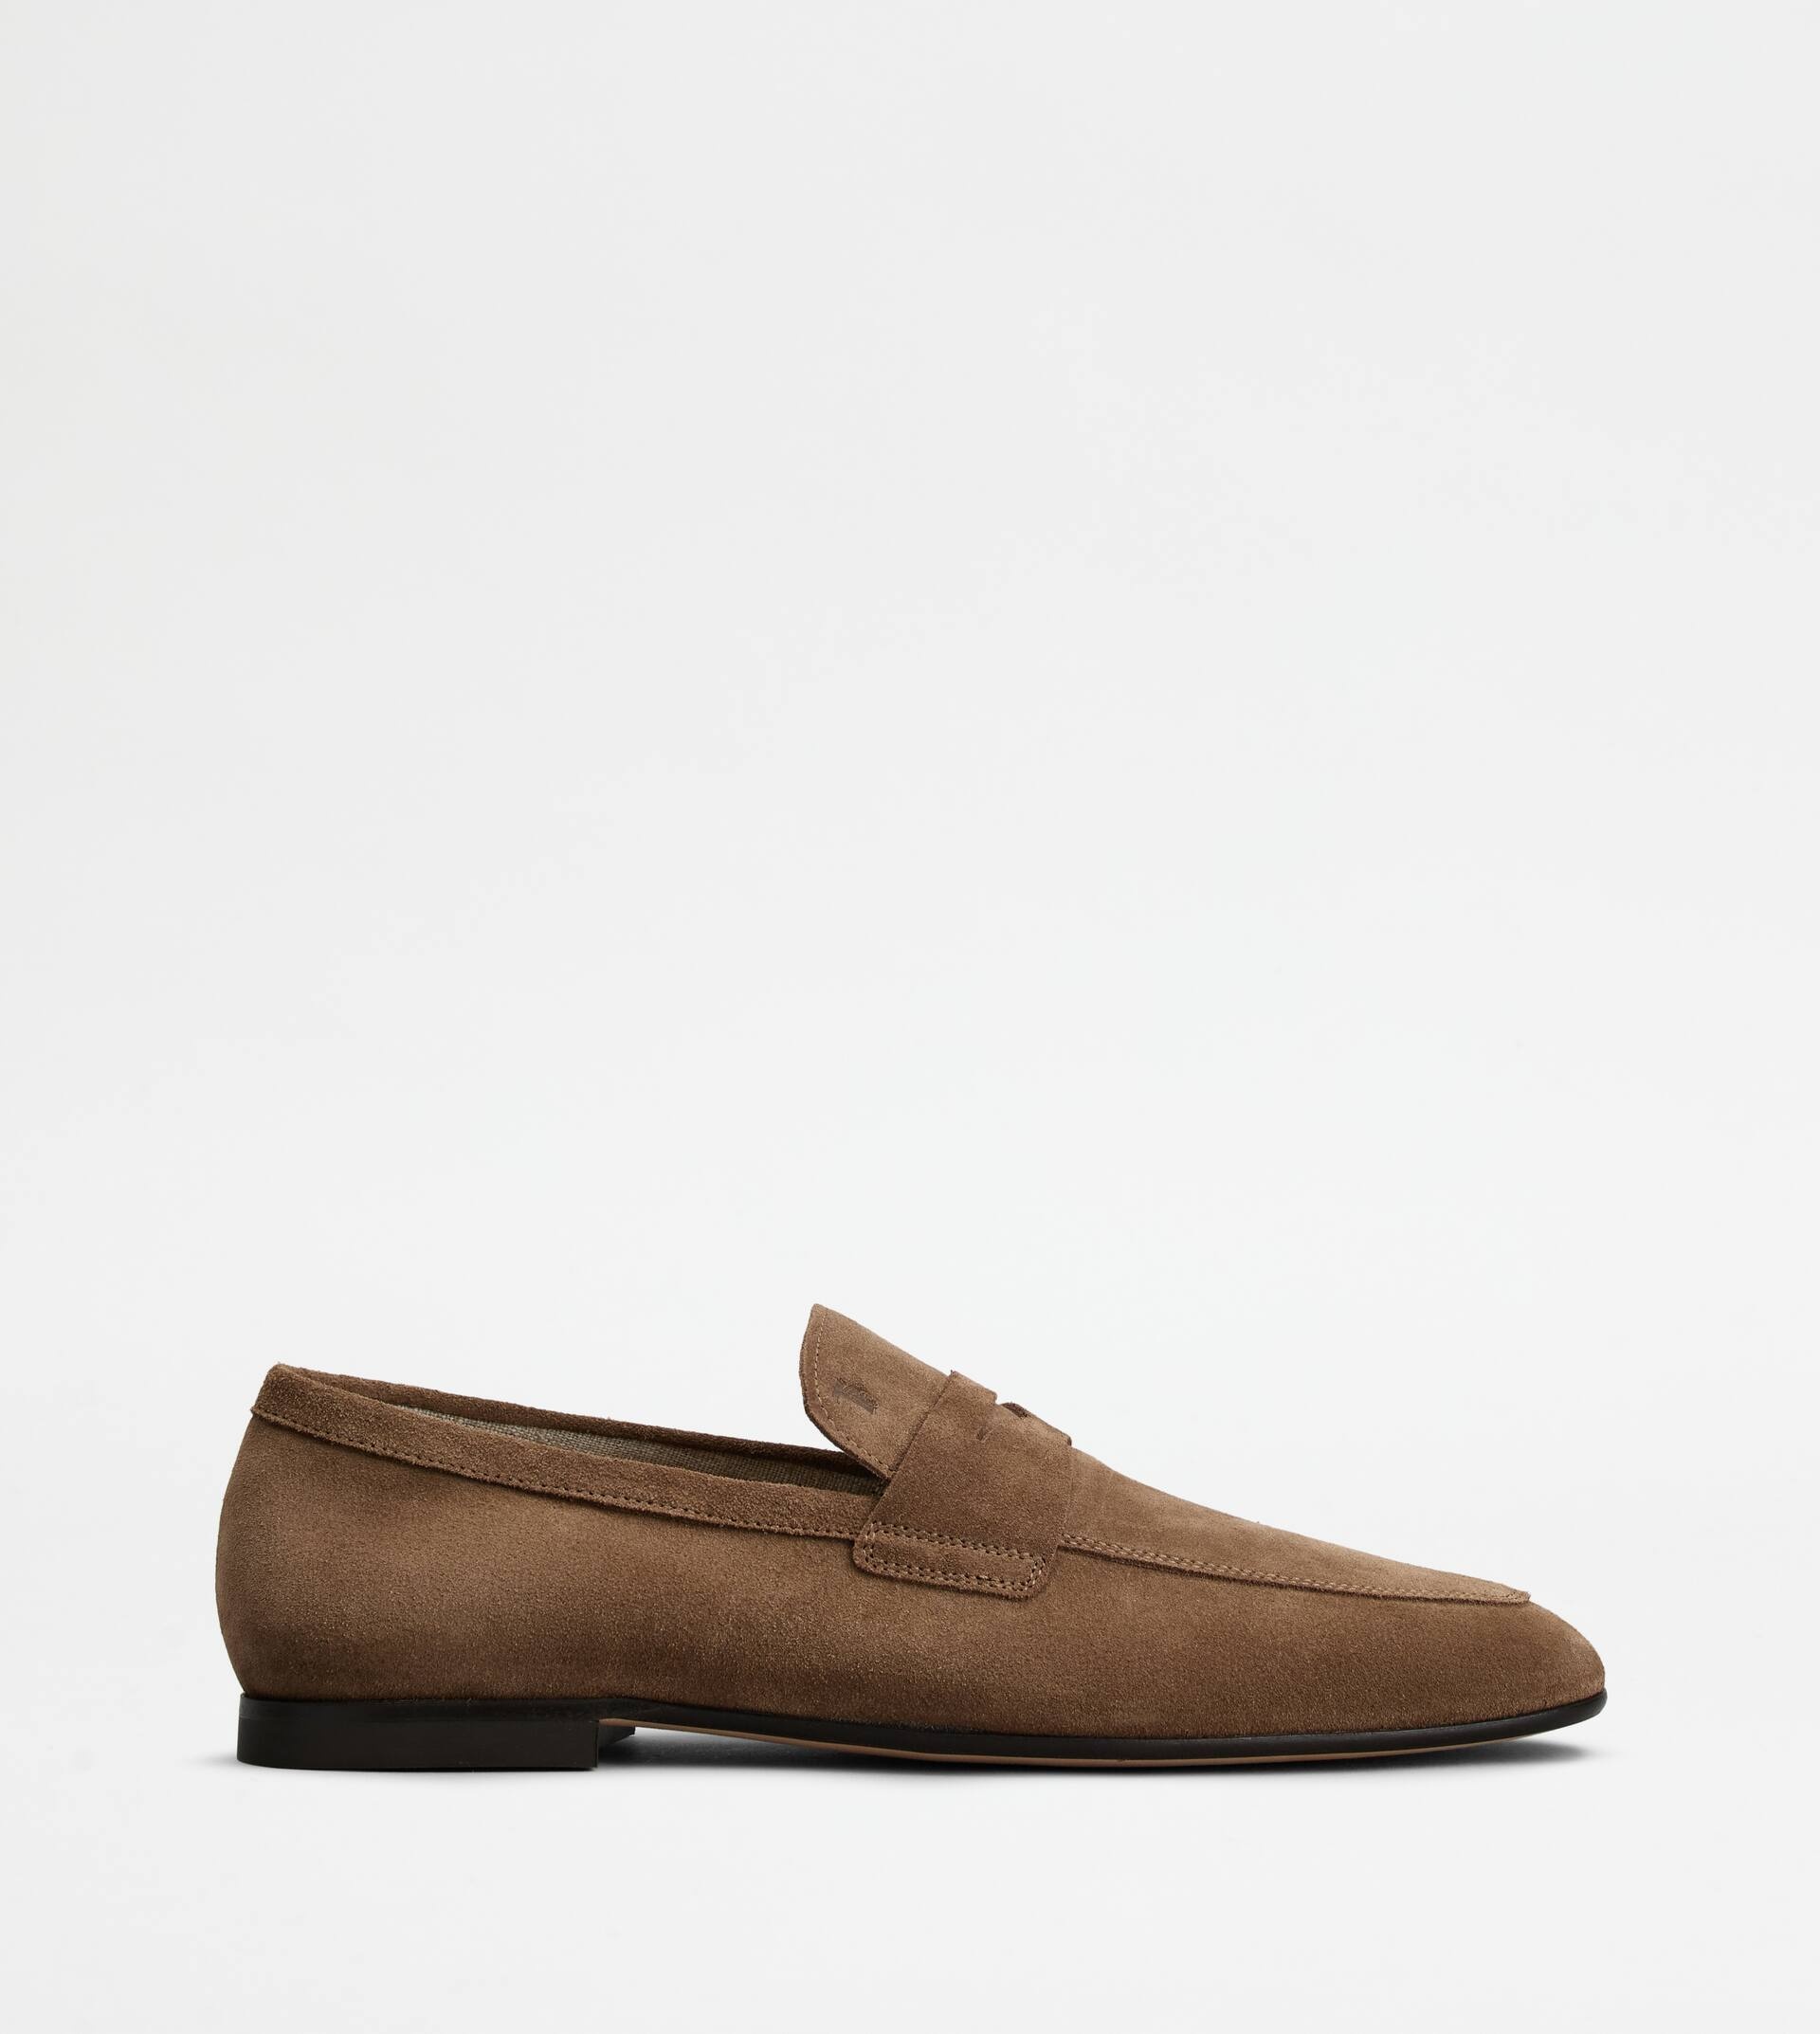 TOD'S LOAFERS IN SUEDE - BROWN - 1